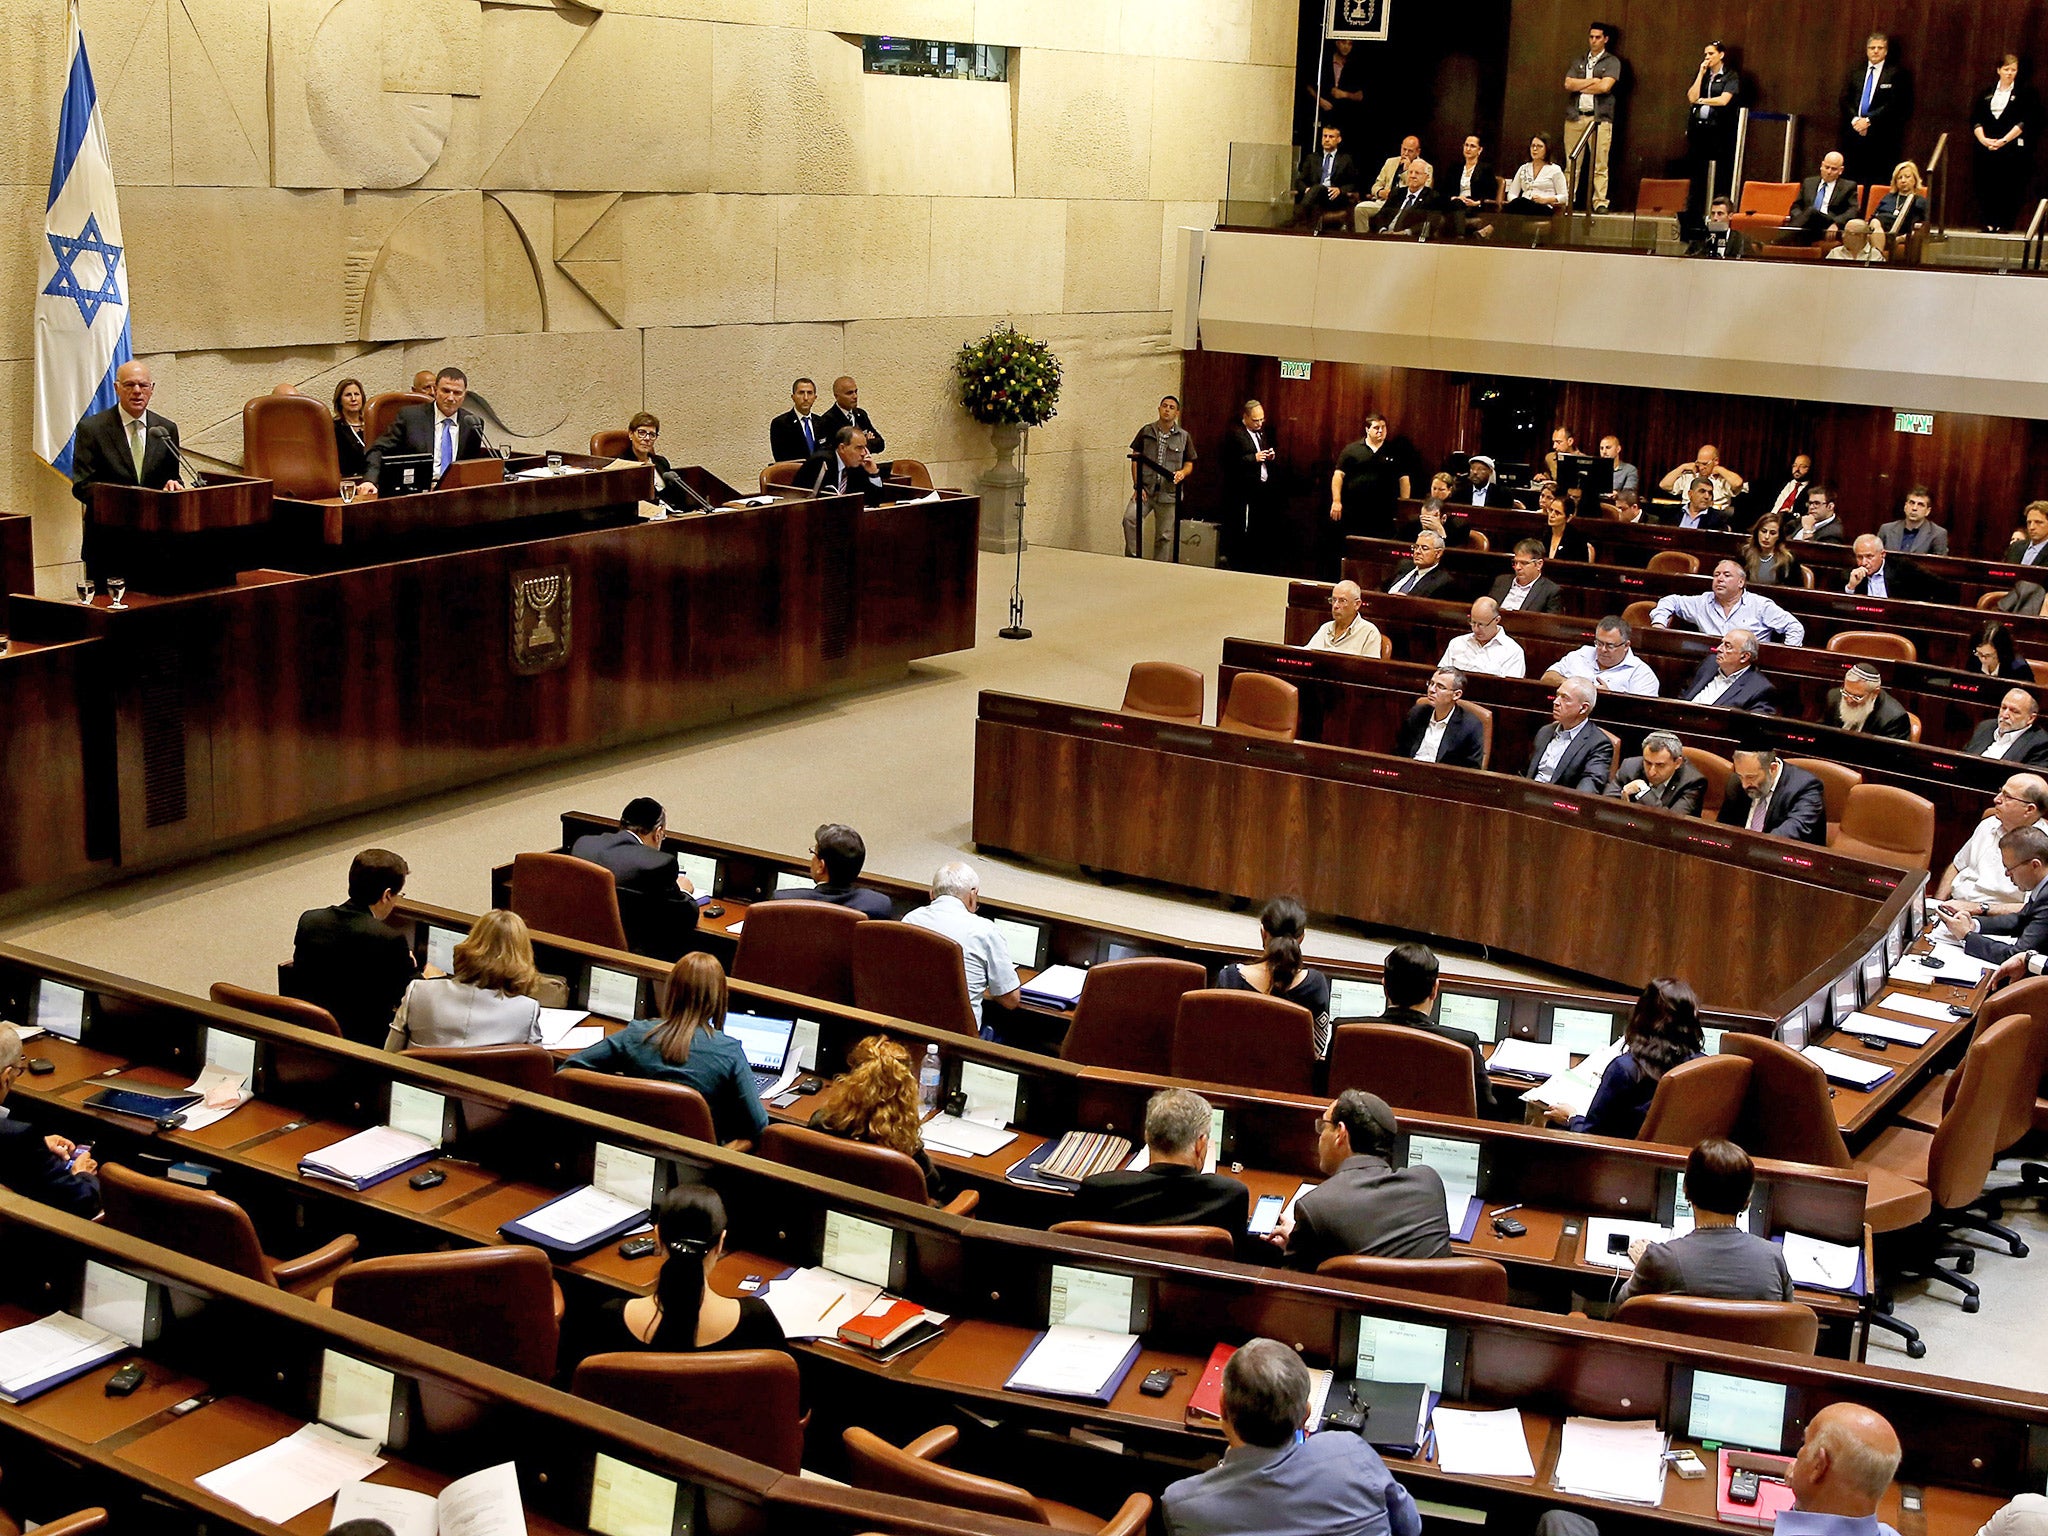 Thirty-three of the Knesset’s 120 MPs are currently women, but despite progress, many have complained of discriminatory treatment